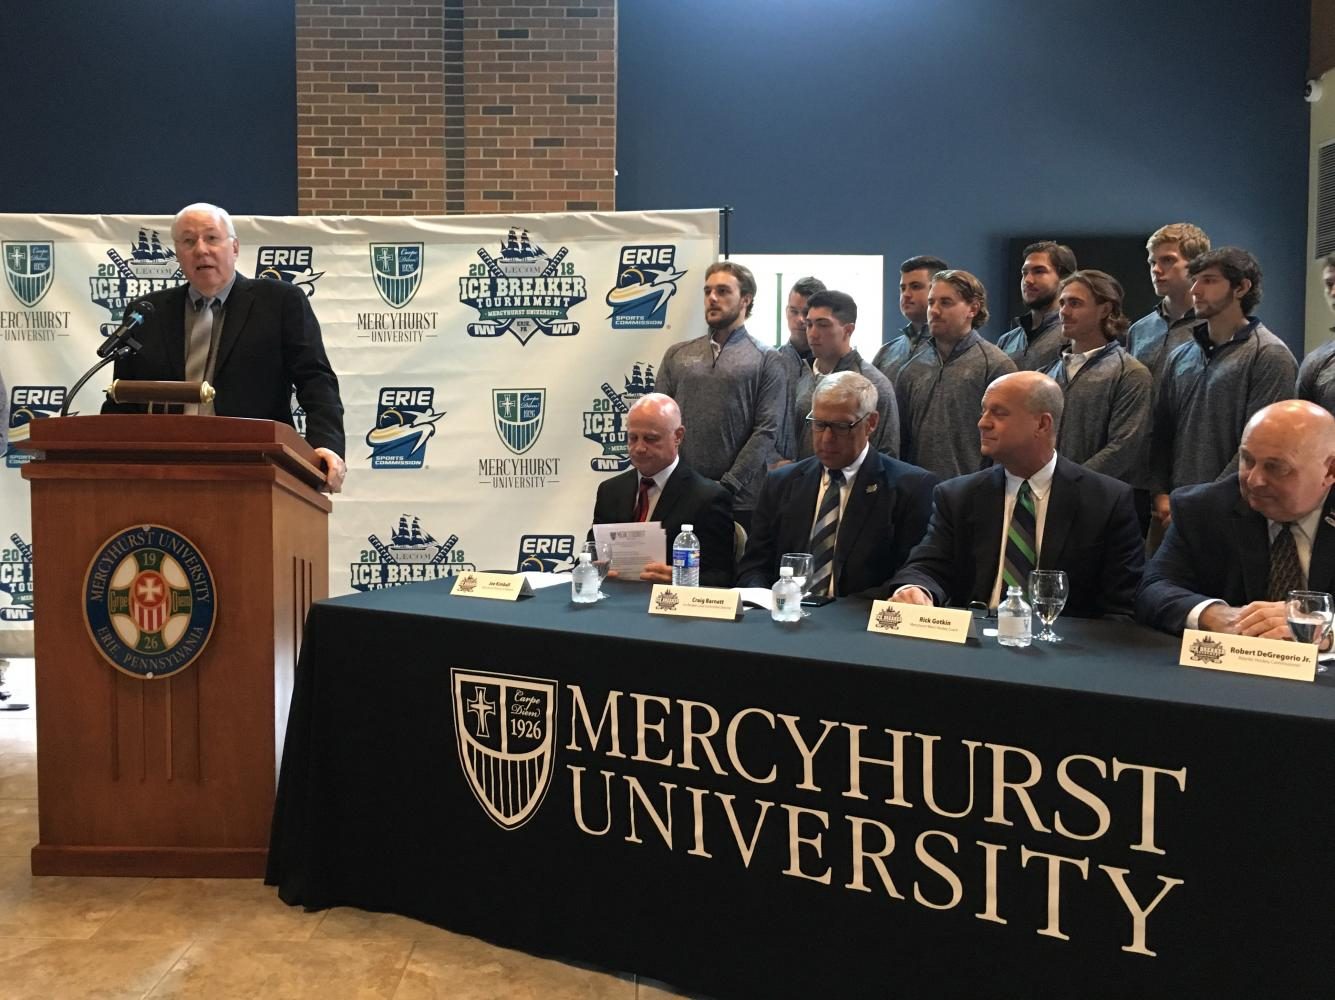 Cool+news+for+city%3A+Mercyhurst+to+host+Ice+Breaker+Tournament